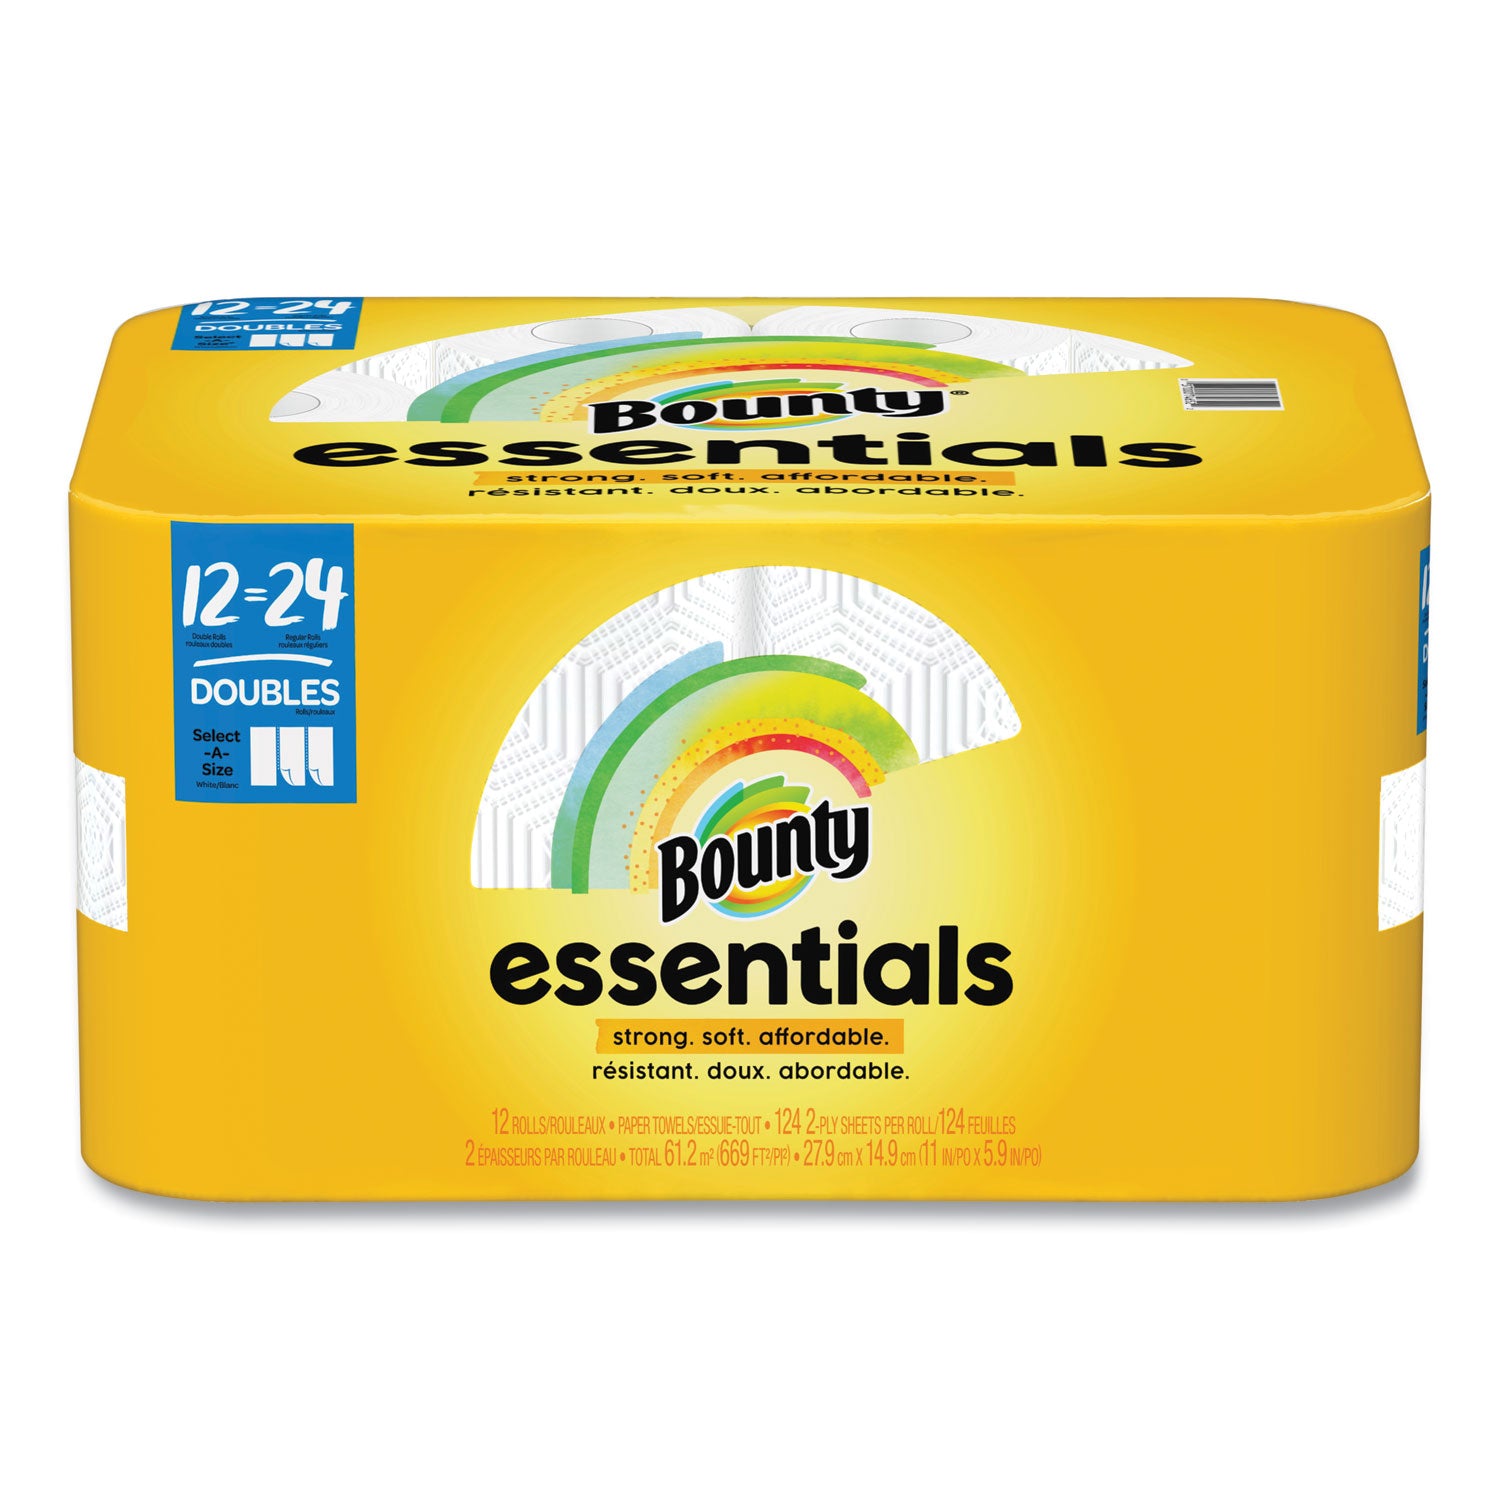 essentials-select-a-size-kitchen-roll-paper-towels-2-ply-124-sheets-roll-12-rolls_pgc74652 - 1